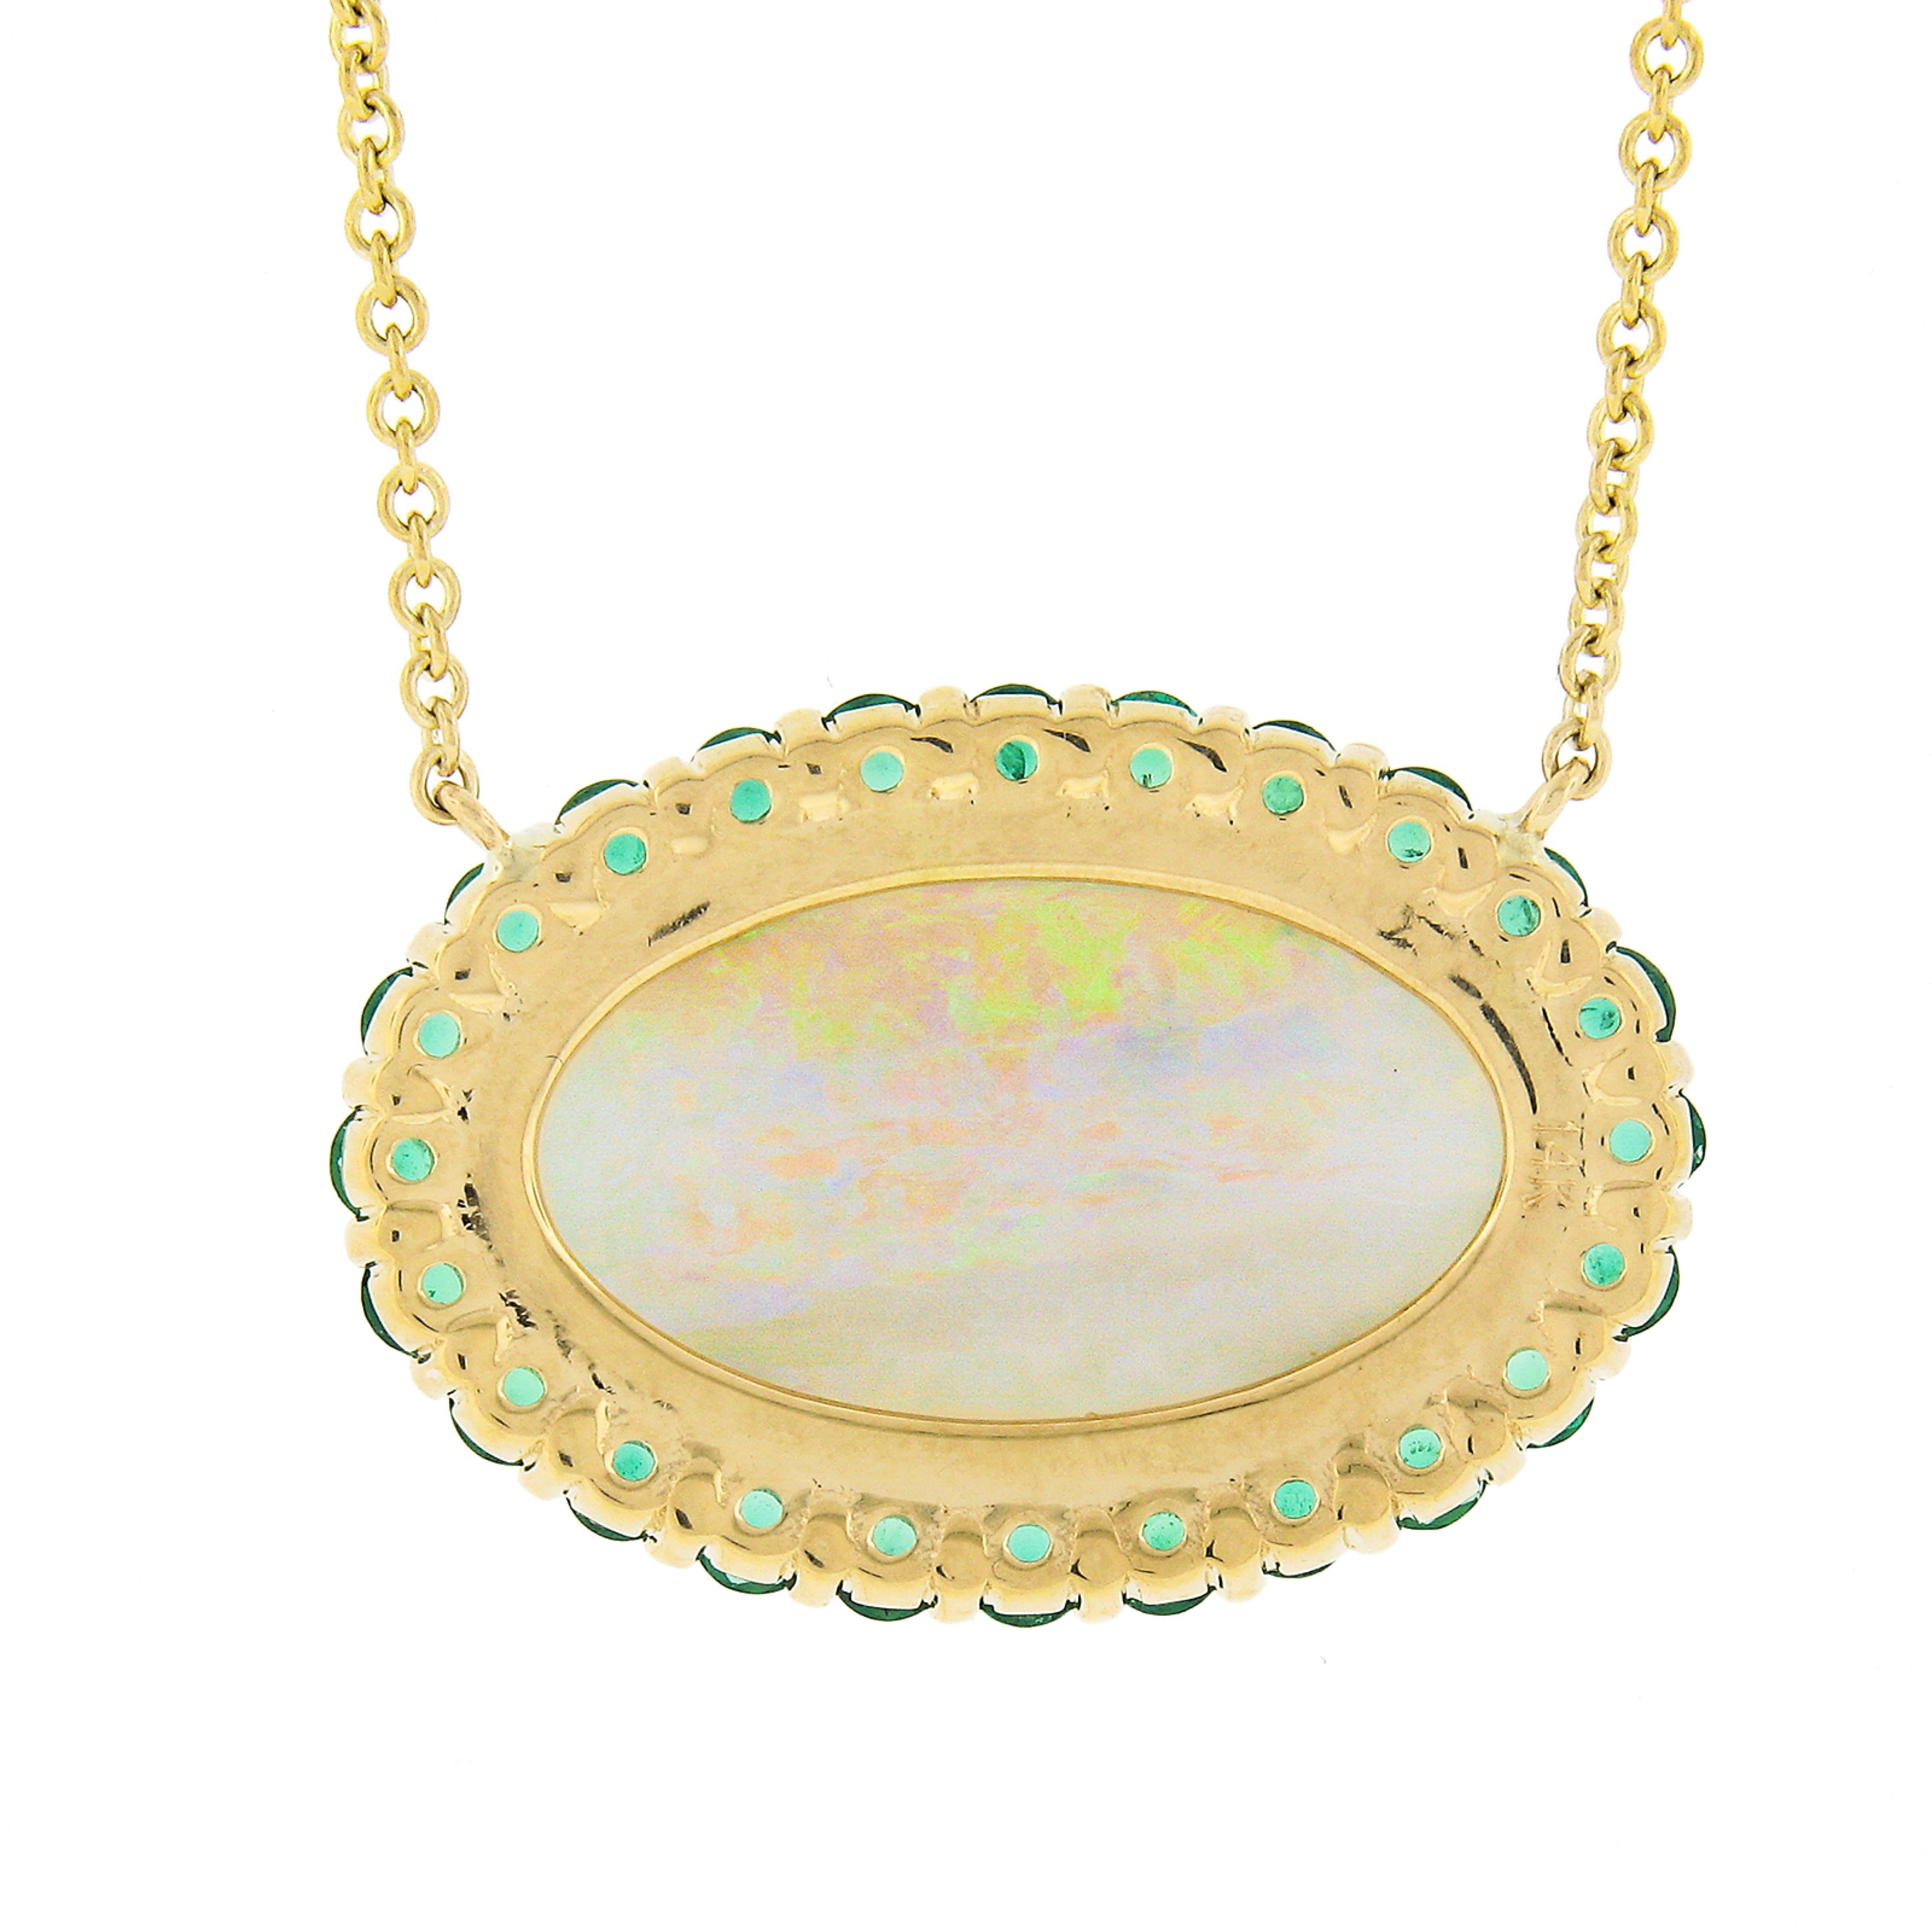 Women's NEW 14k Gold 6.31ctw GIA Oval Cabochon Opal w/ Emerald Halo Pendant Necklace For Sale